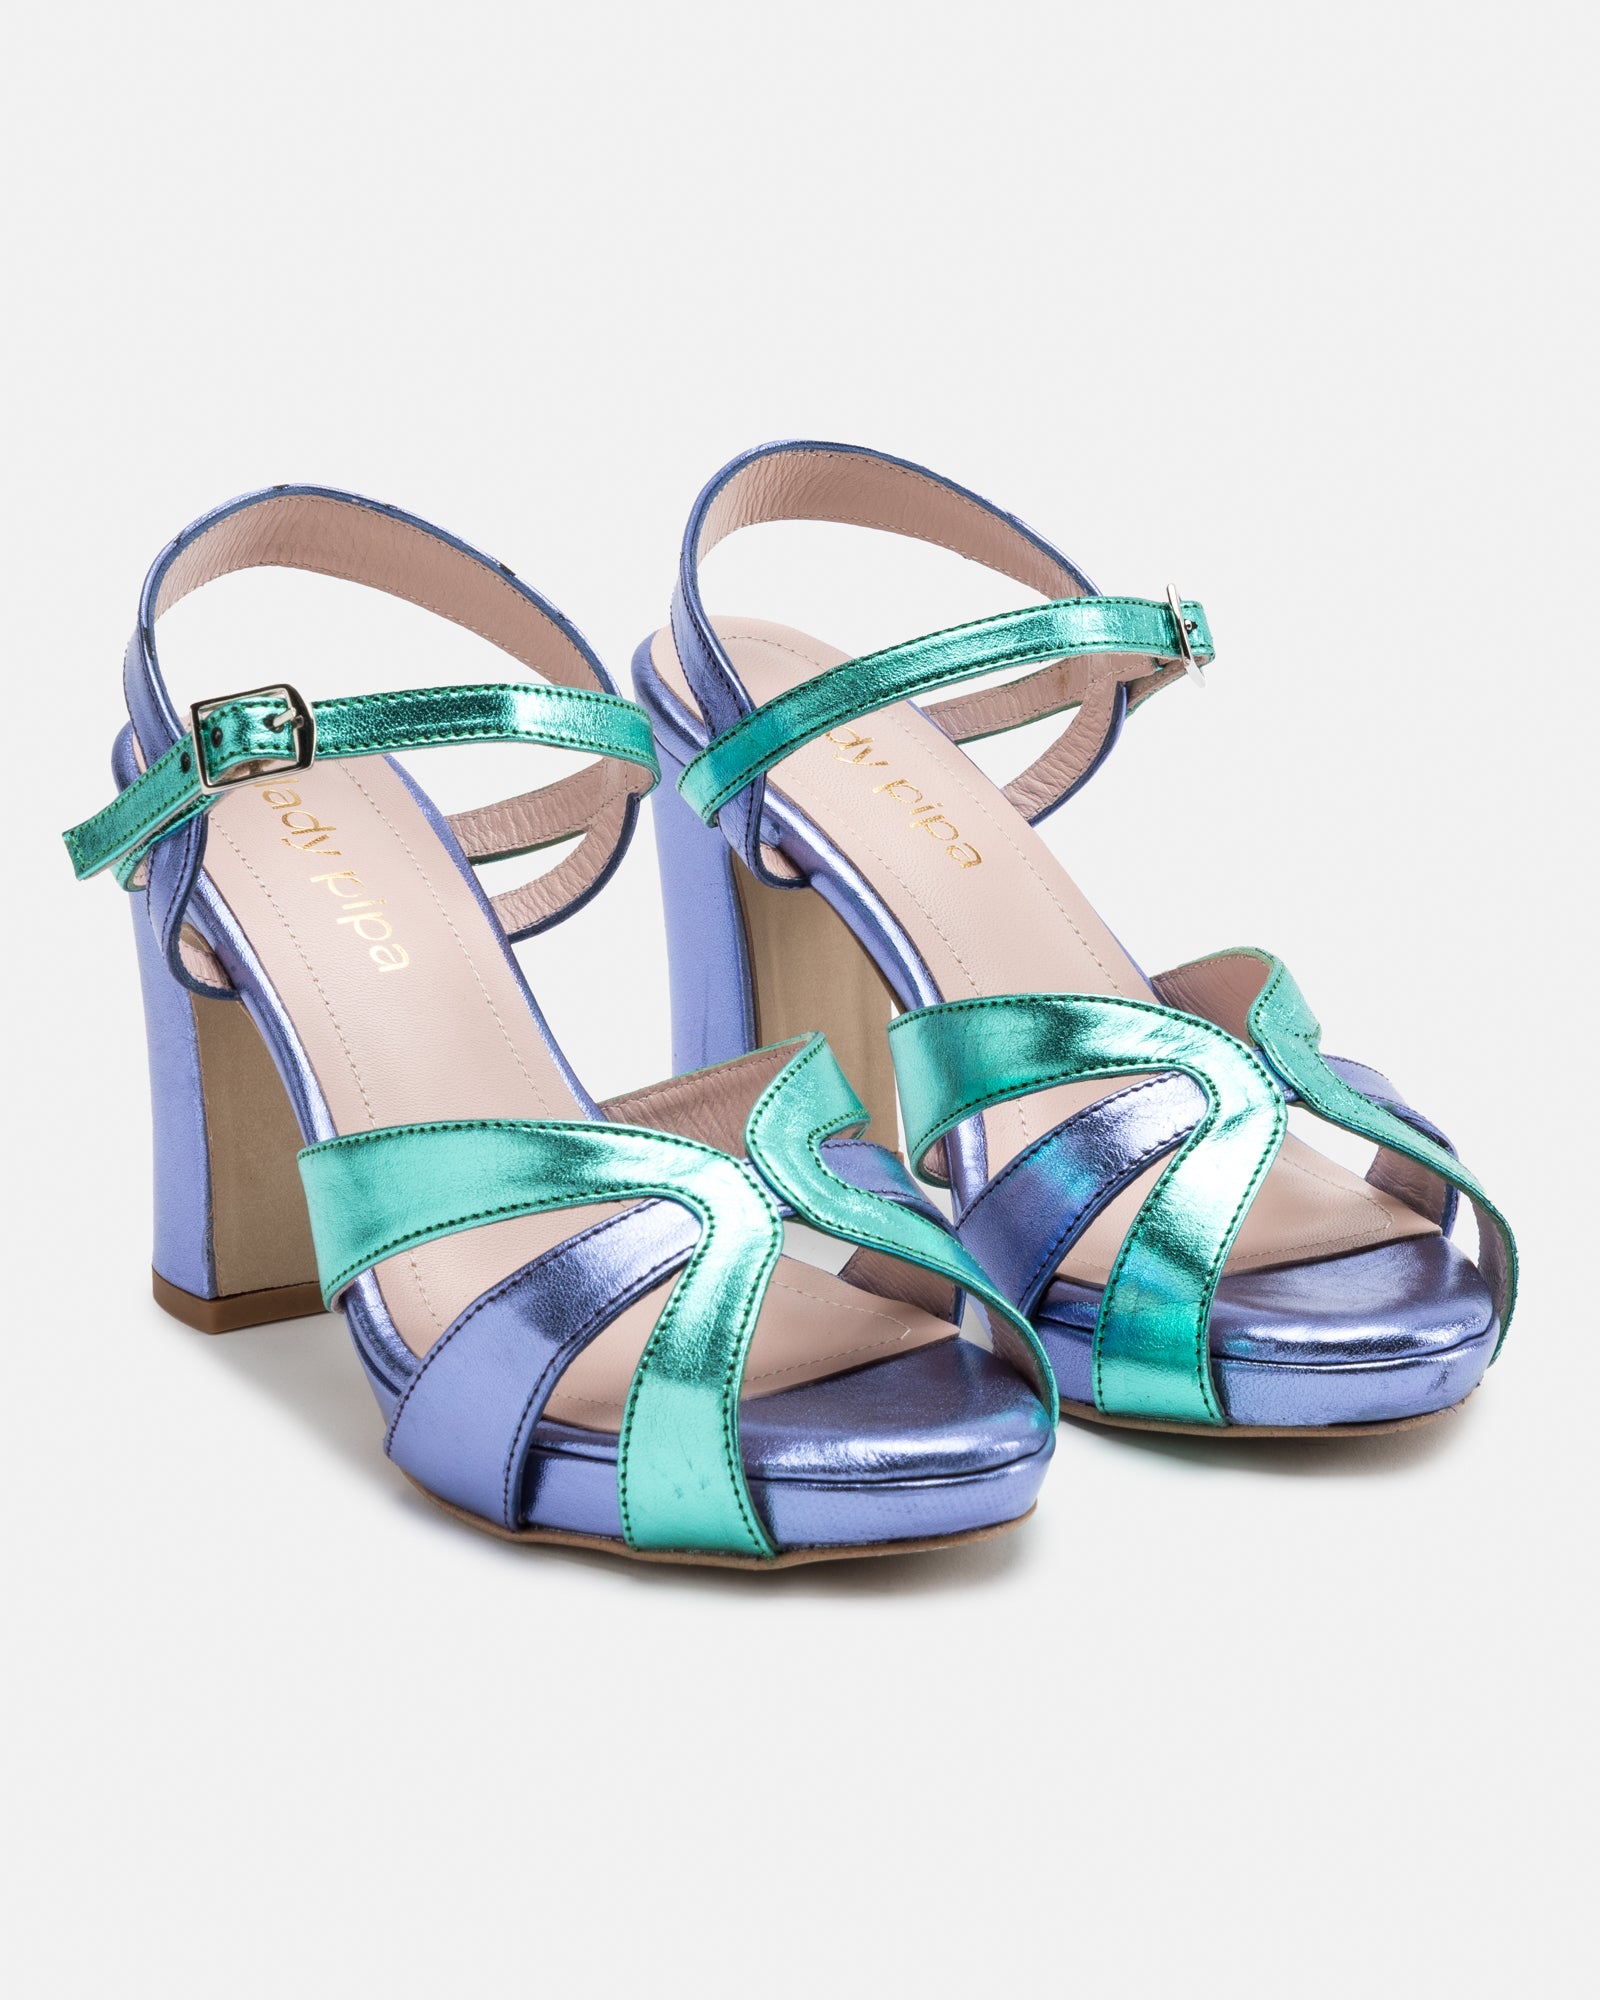 Candela Purple and green Sandals